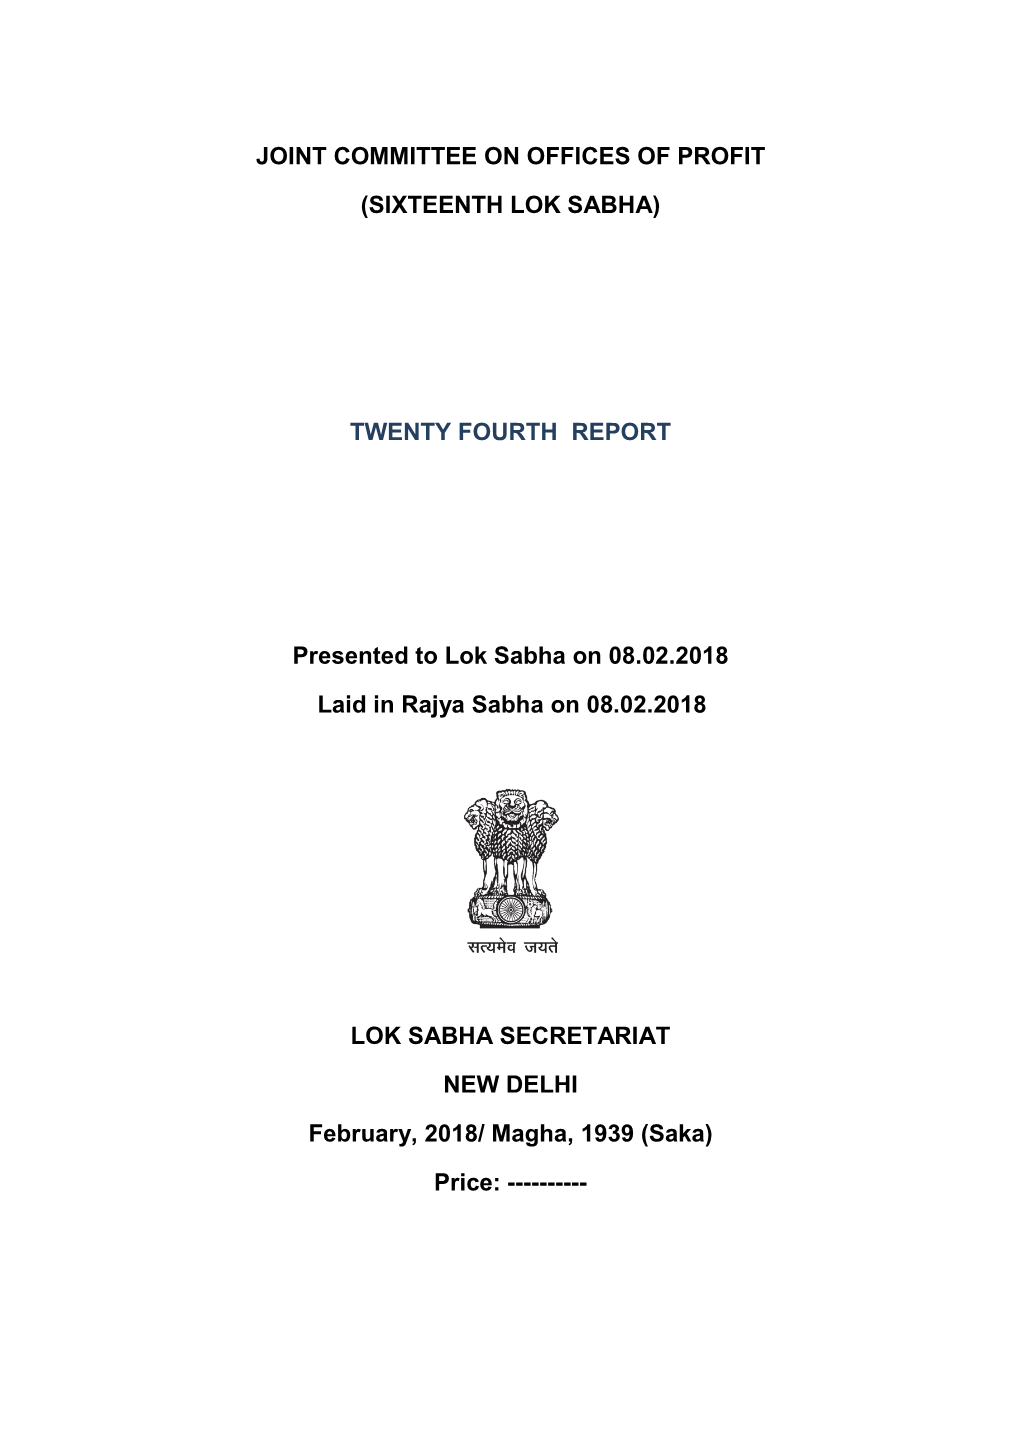 JOINT COMMITTEE on OFFICES of PROFIT (SIXTEENTH LOK SABHA) $ Dr